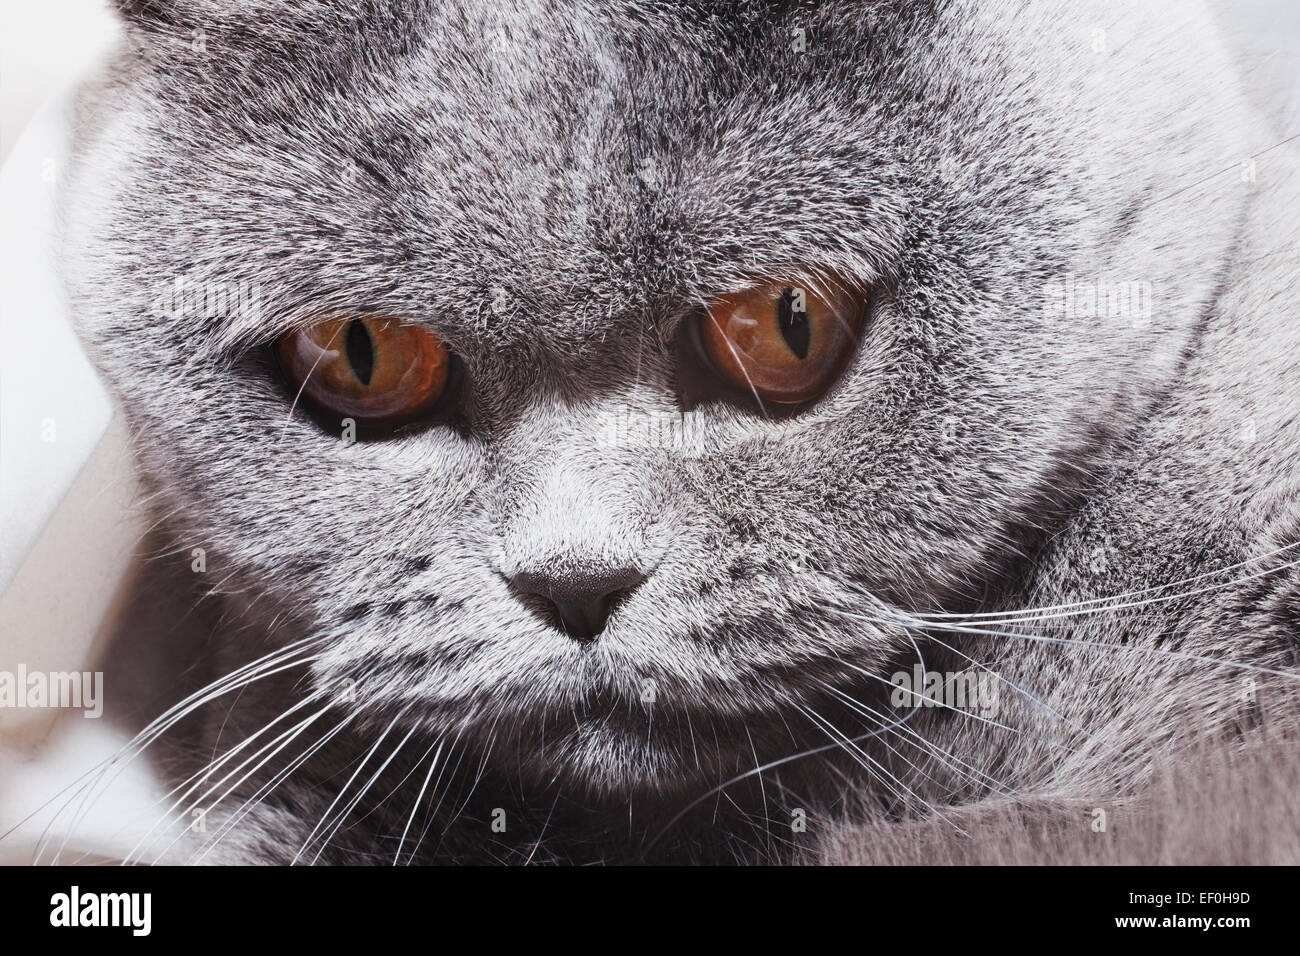 Funny gray British cat with bright yellow eyes close-up Stock Photo